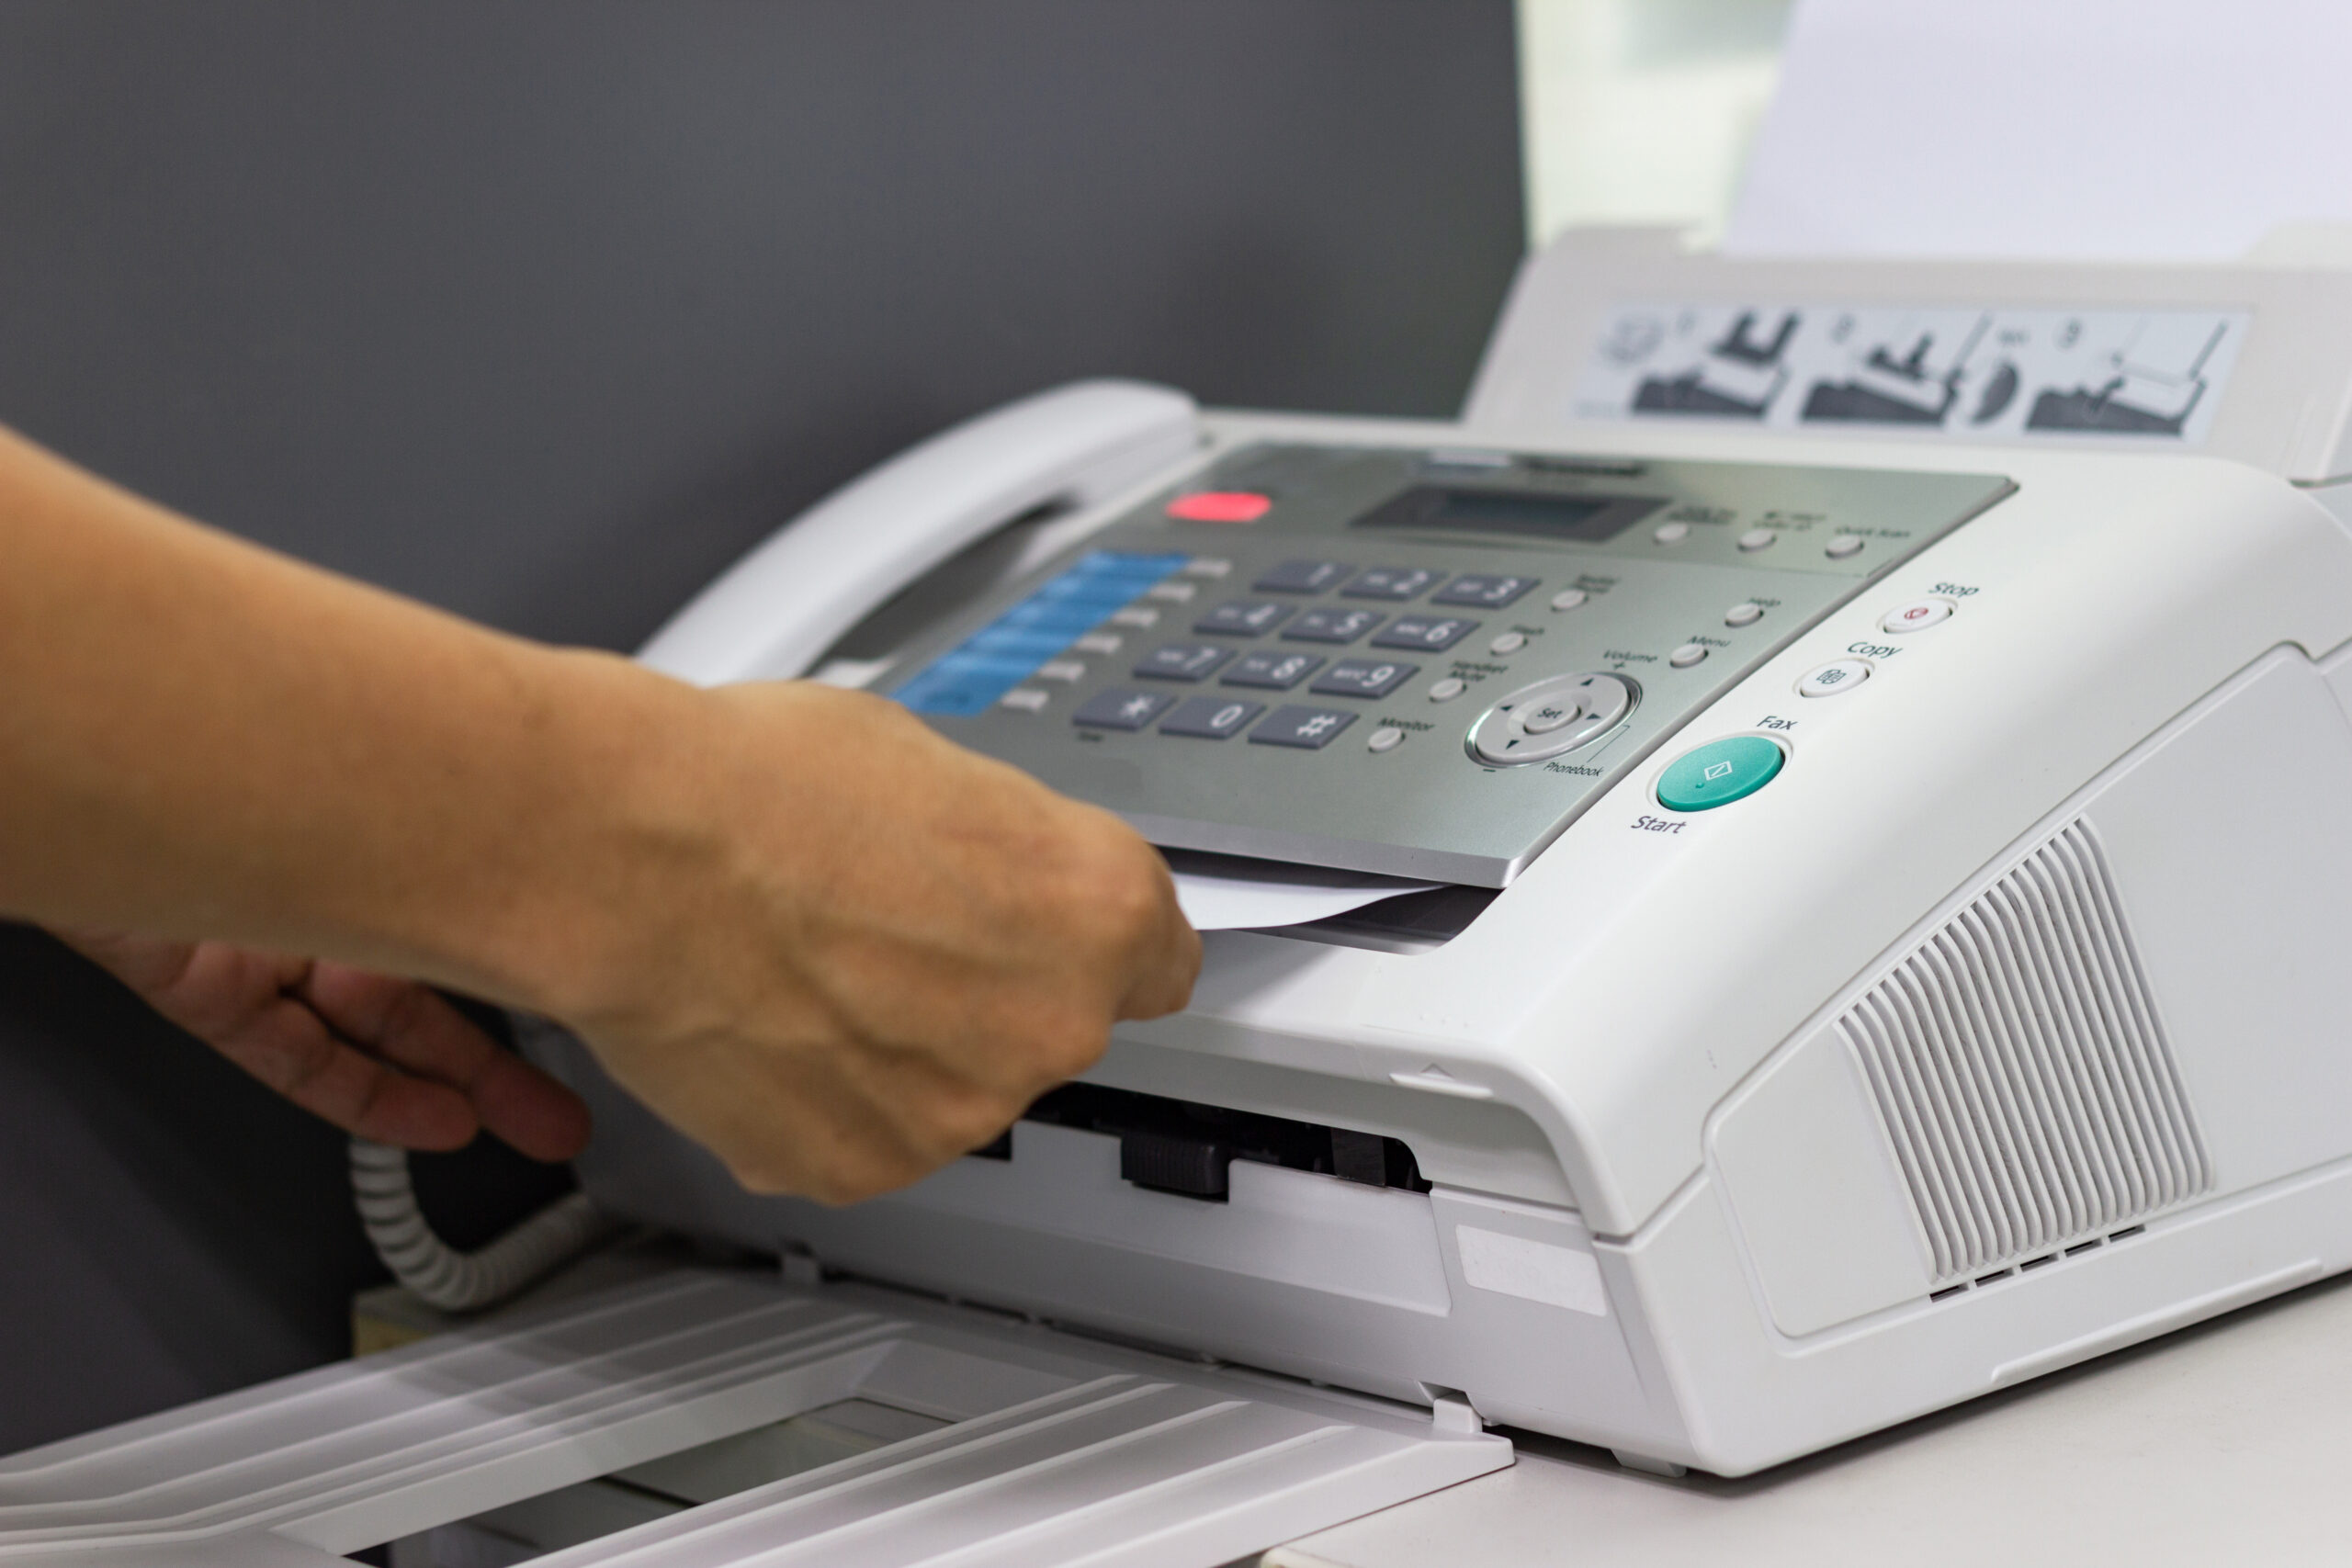 A person's hand is removing a sheet of paper from a multifunction printer with Internet Faxing capabilities in an office setting. The printer has several control buttons and a paper output tray.